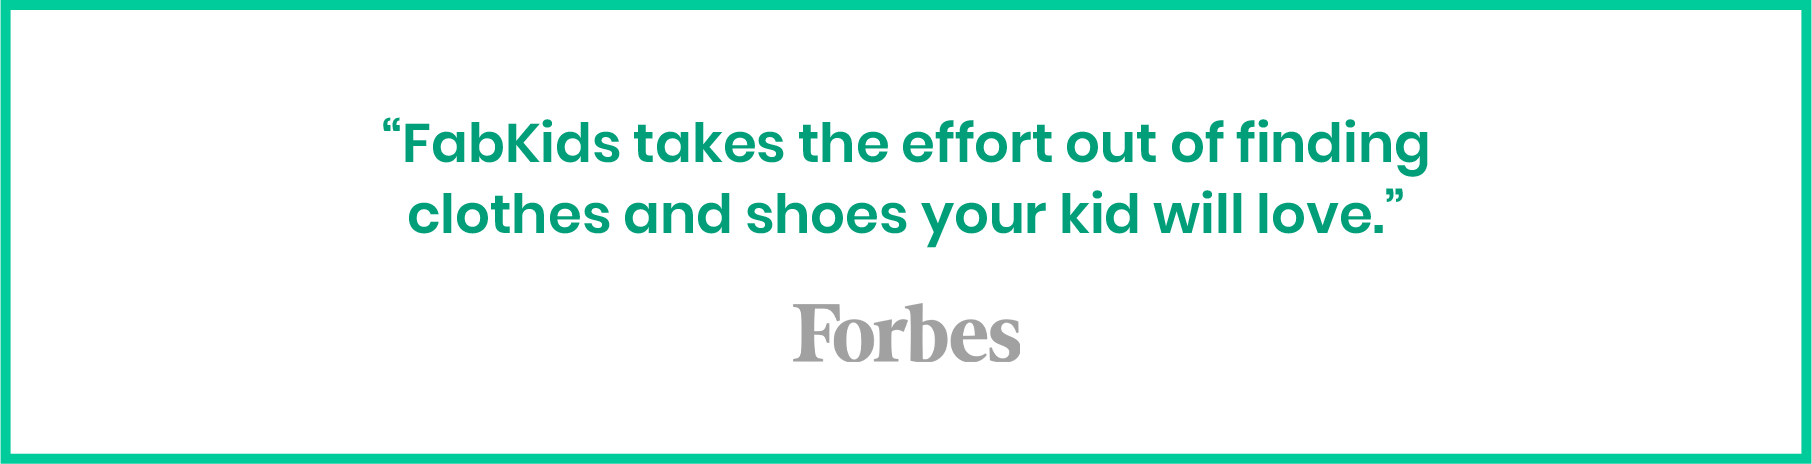 FabKids takes the effort out of finding clothes and shoes your kid will love. - Forbes